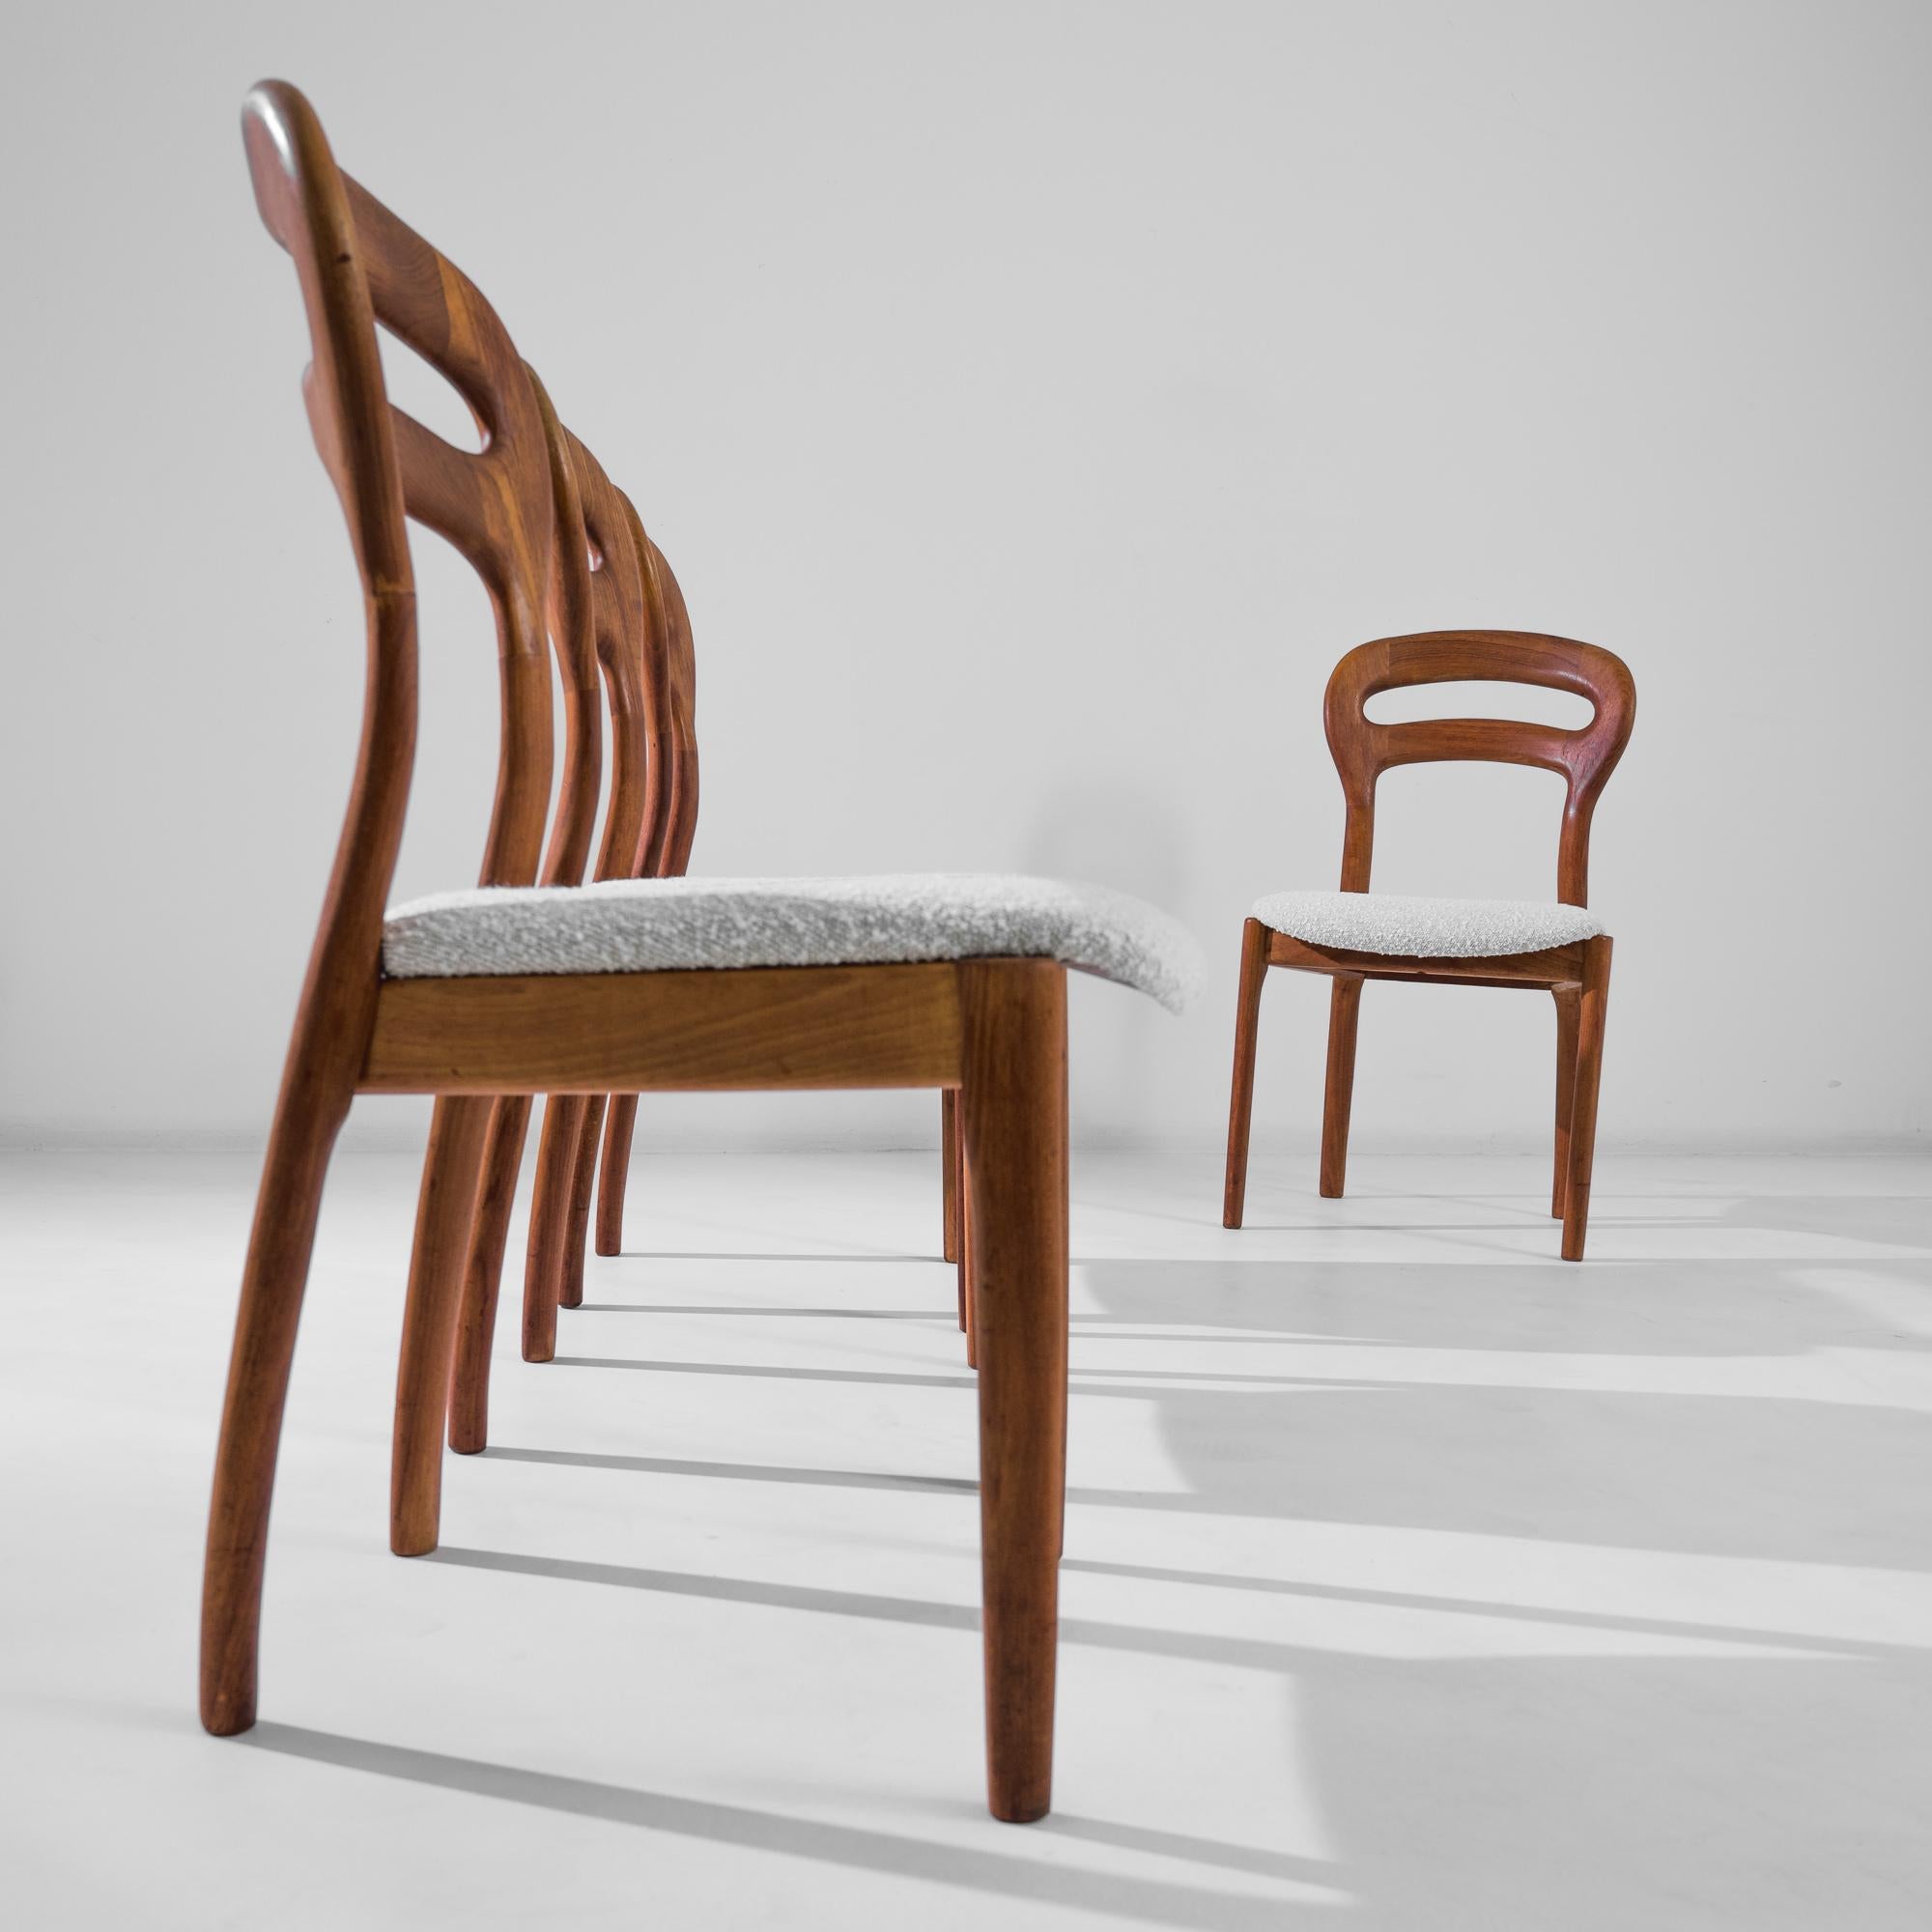 These Danish vintage chairs mersmarise with the melting plasticity of their sleek silhouettes: the surrealistic curves of the teak backrests and convex back legs impart the air of the Daliesque timelessness also expressed in the shape of the white